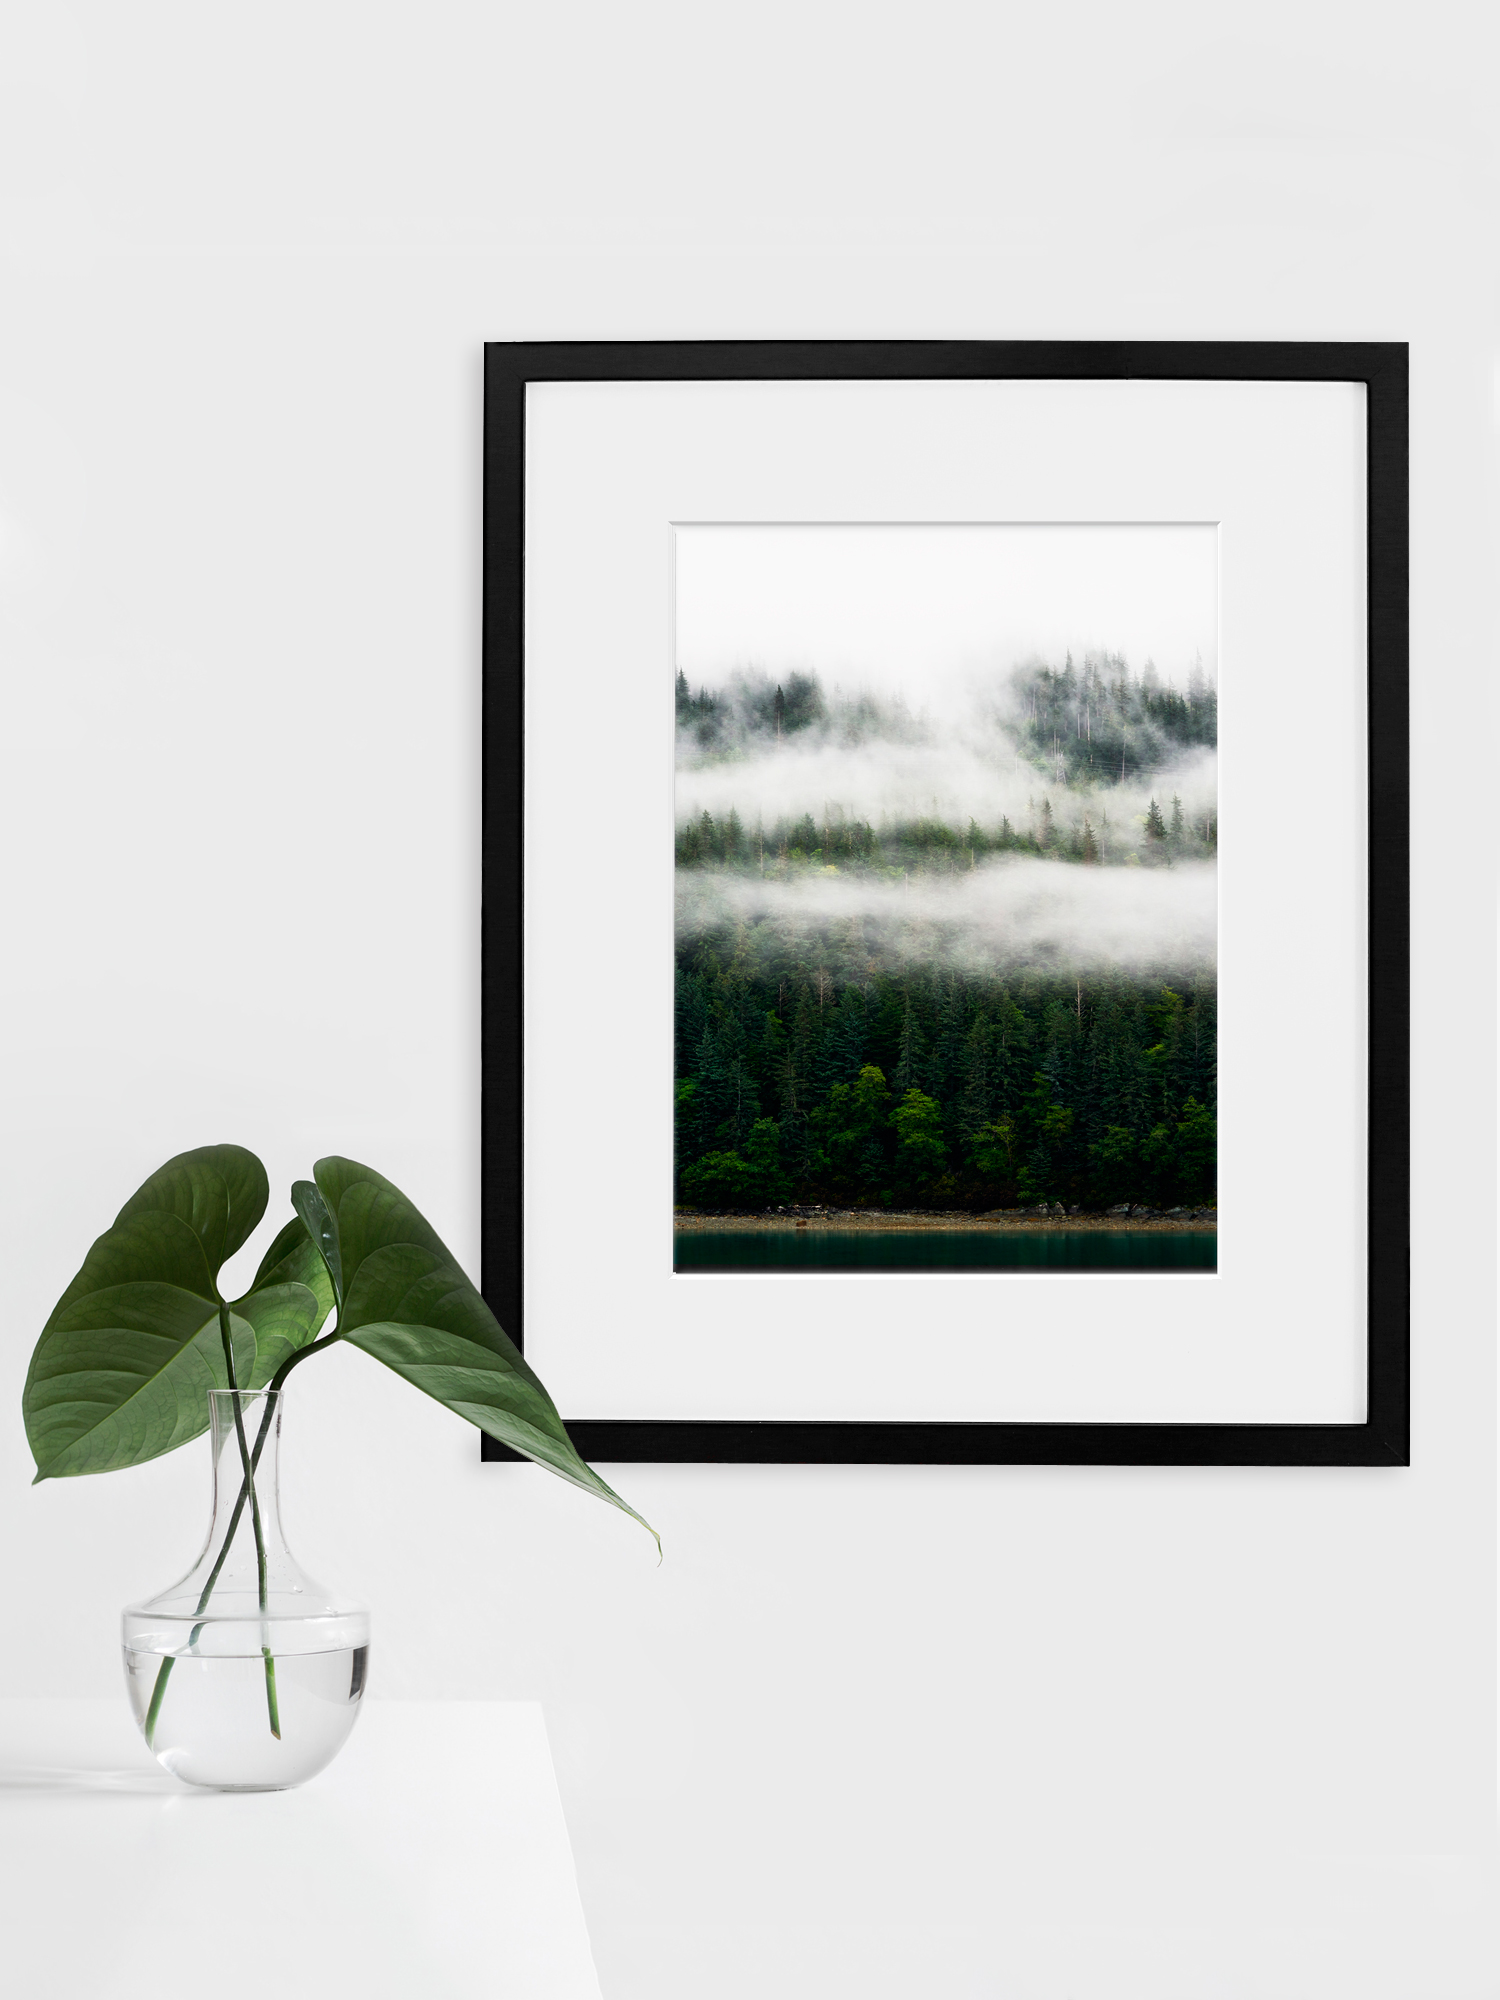 Into the Wild - Print and Frame options. 